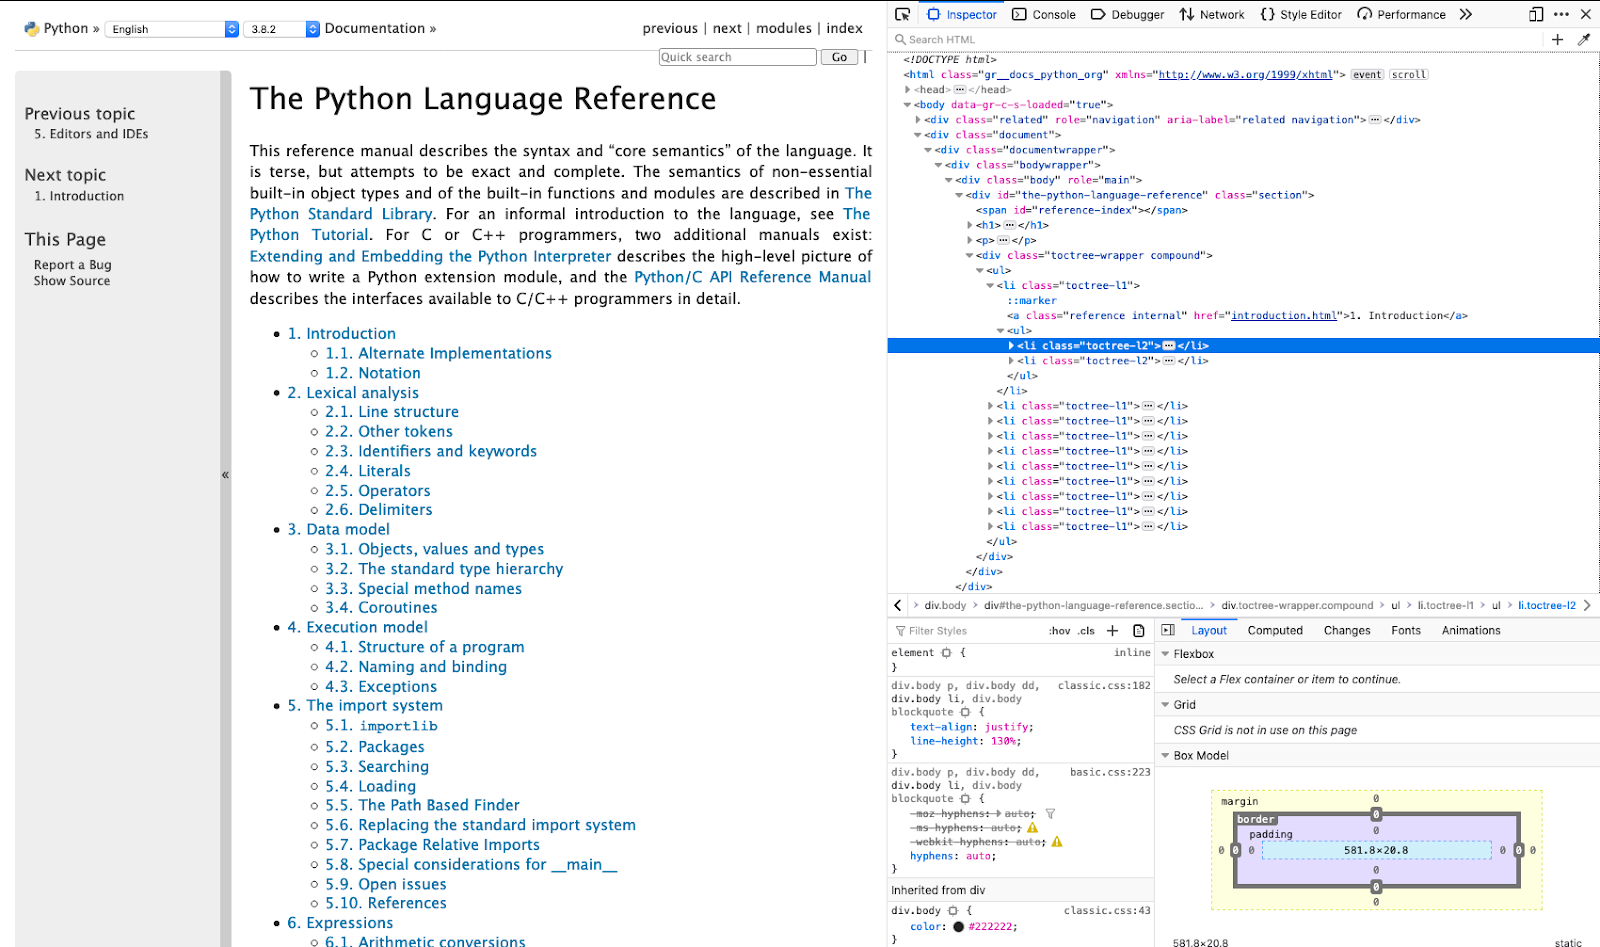 inspect Python documentation in browser